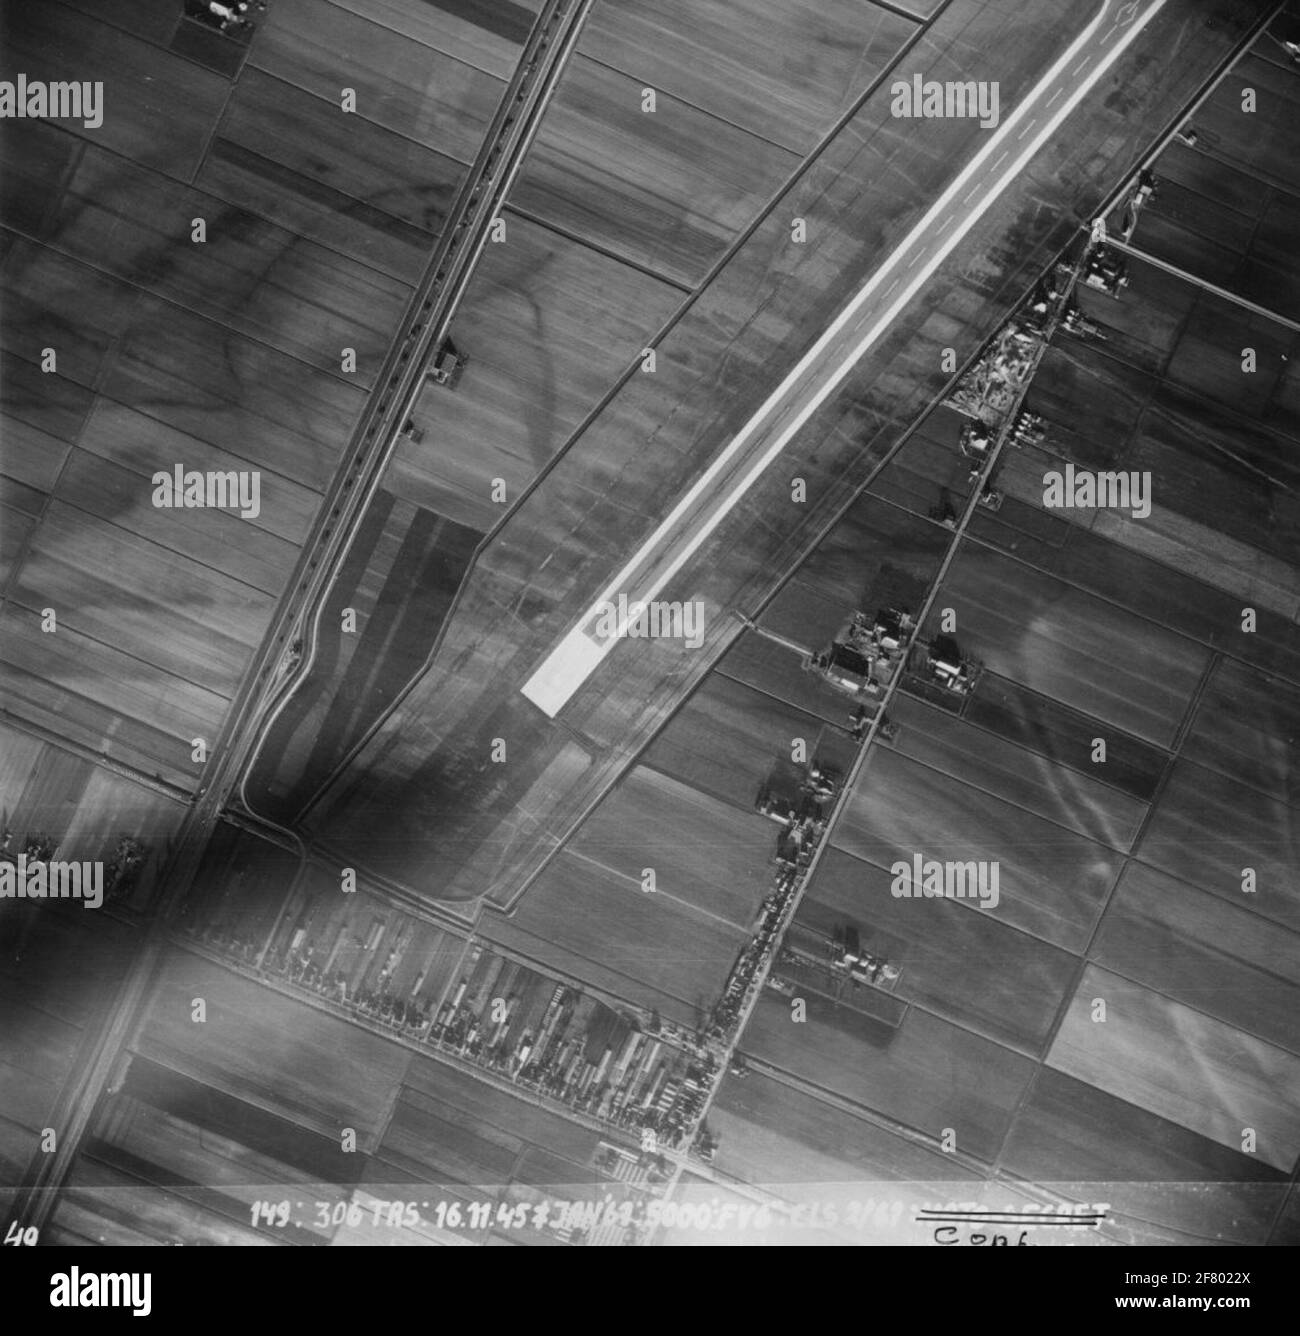 Aerial view of the Kaagbaan (06-24) from Schiphol Airport. The road to the left is the current A4. The current Schiphol South and Center is located at the unbuilt part in between this. This aerial photo is classified as NATO-Confidential. Stock Photo